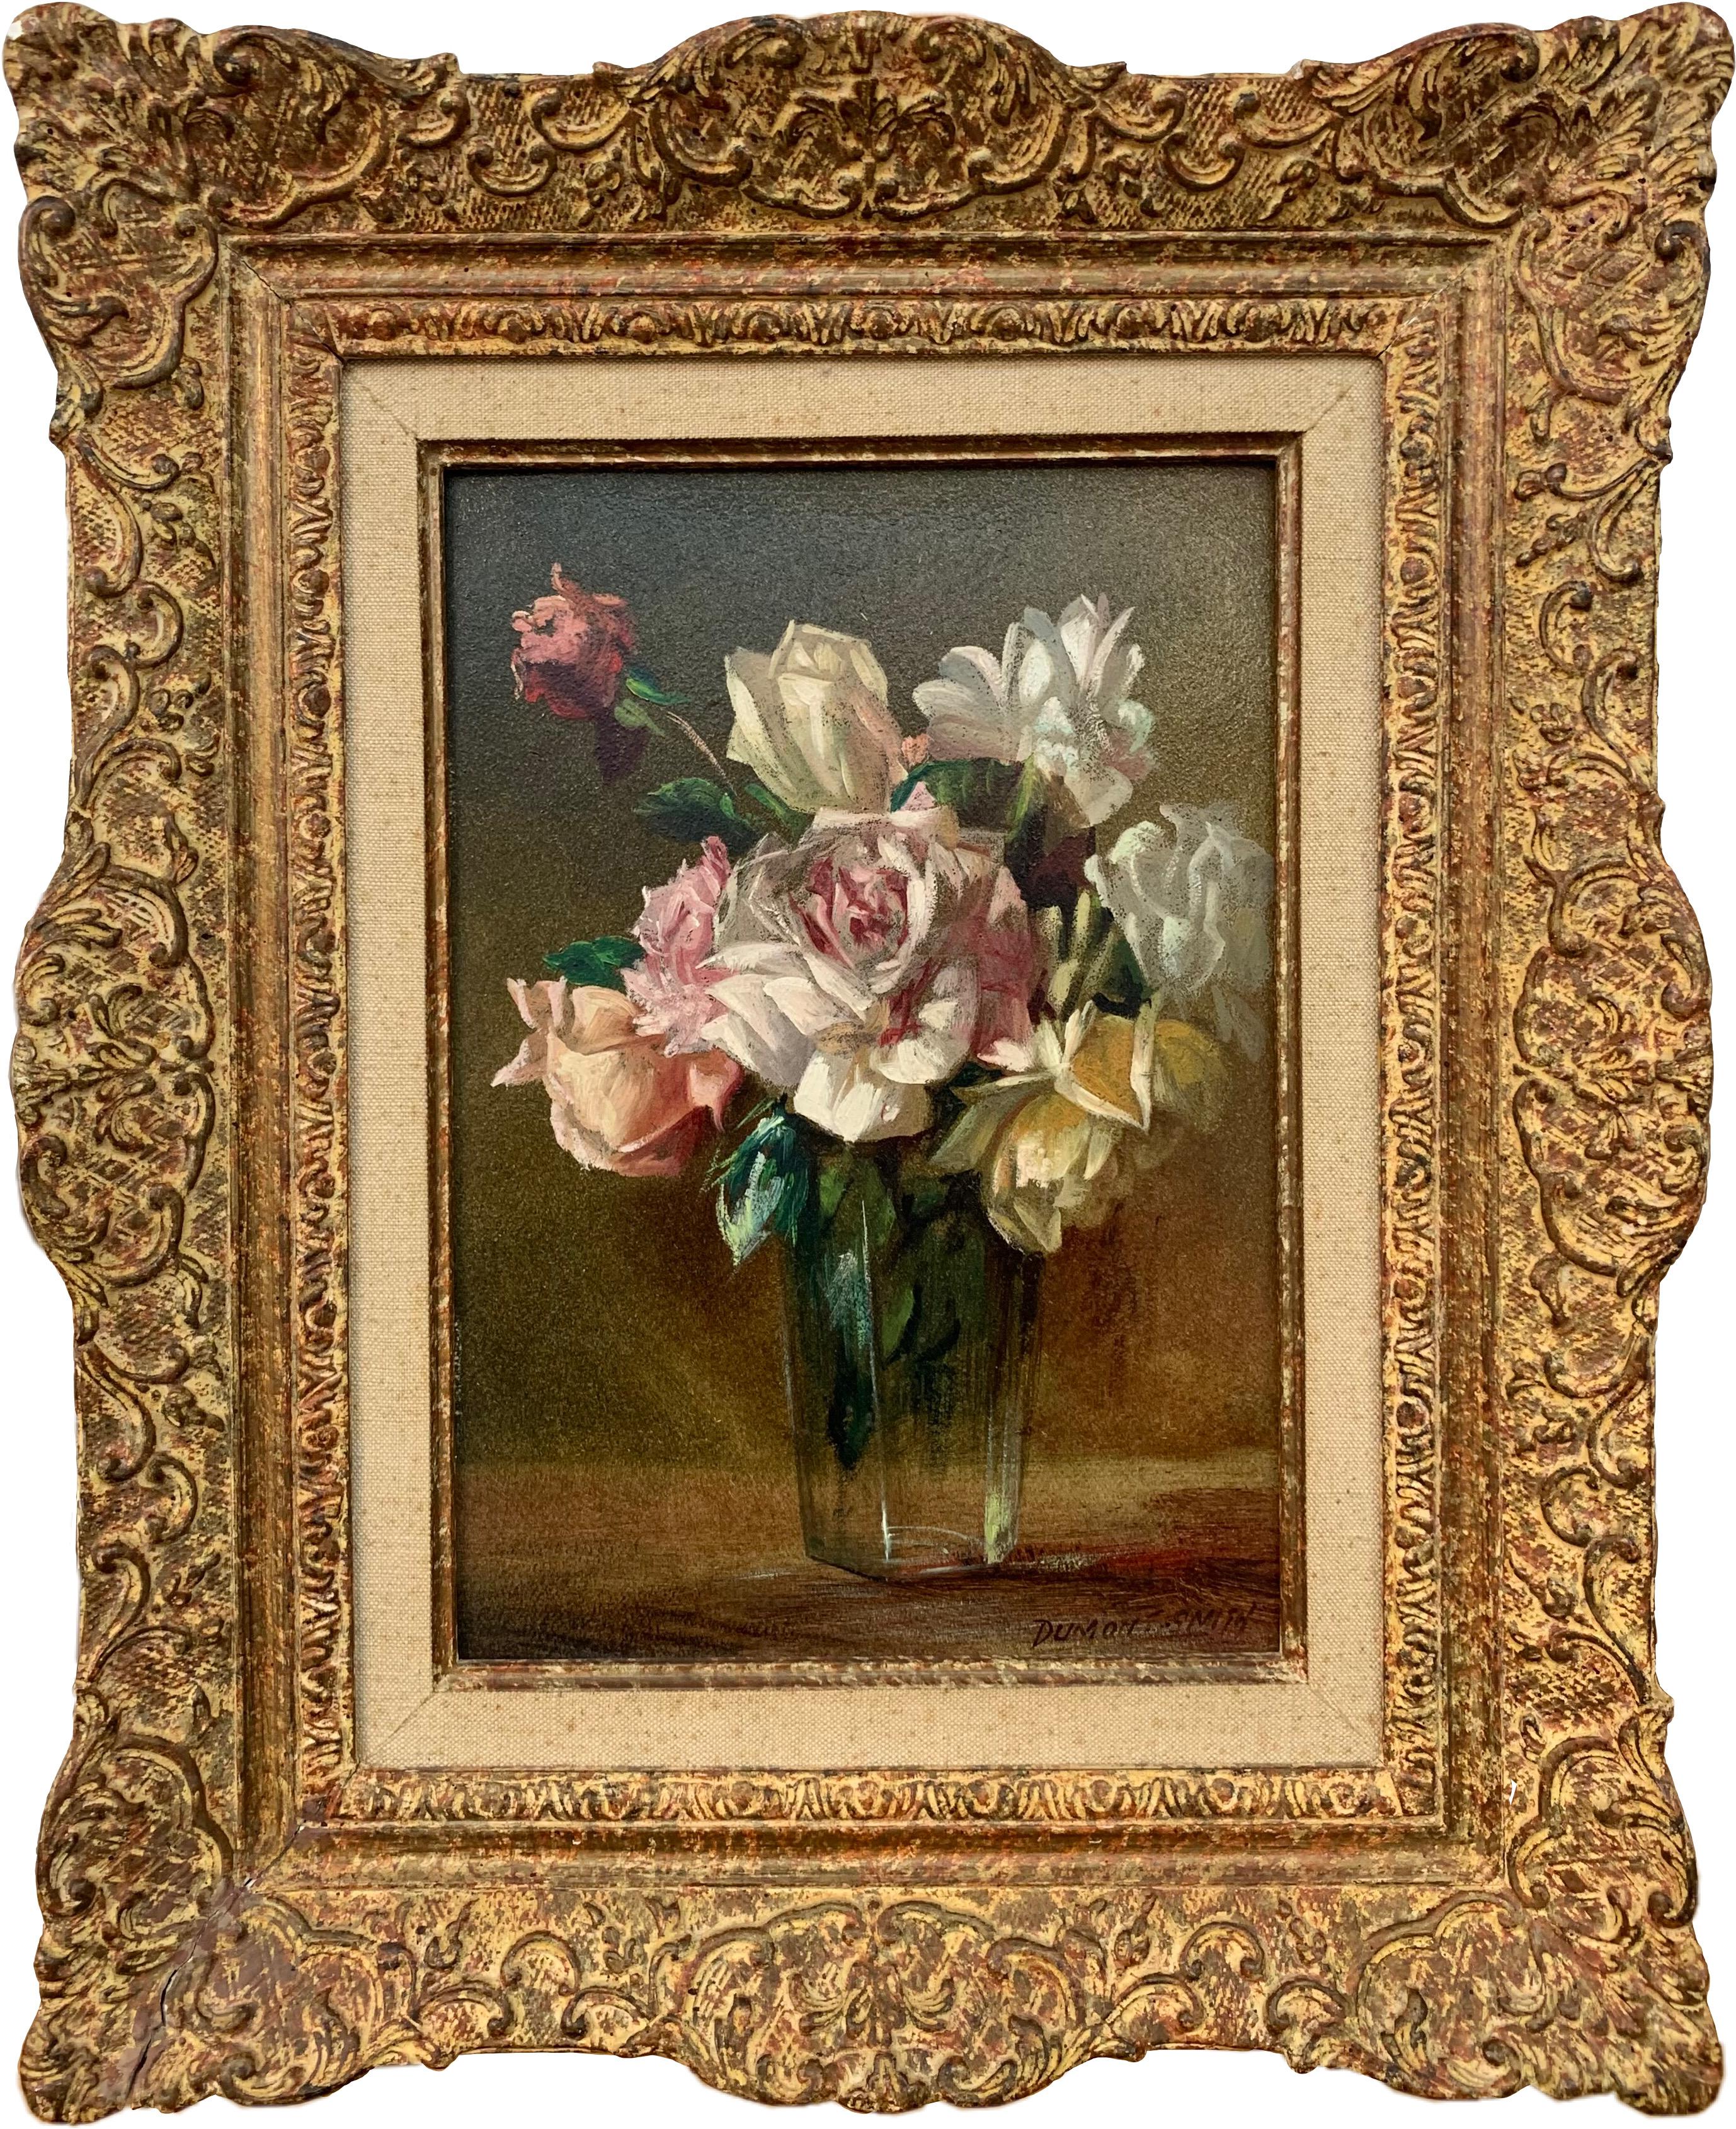 Robert Dumont-Smith Interior Painting - Still Life Painting of Rose Flowers in a Vase by 20th Century British Artist